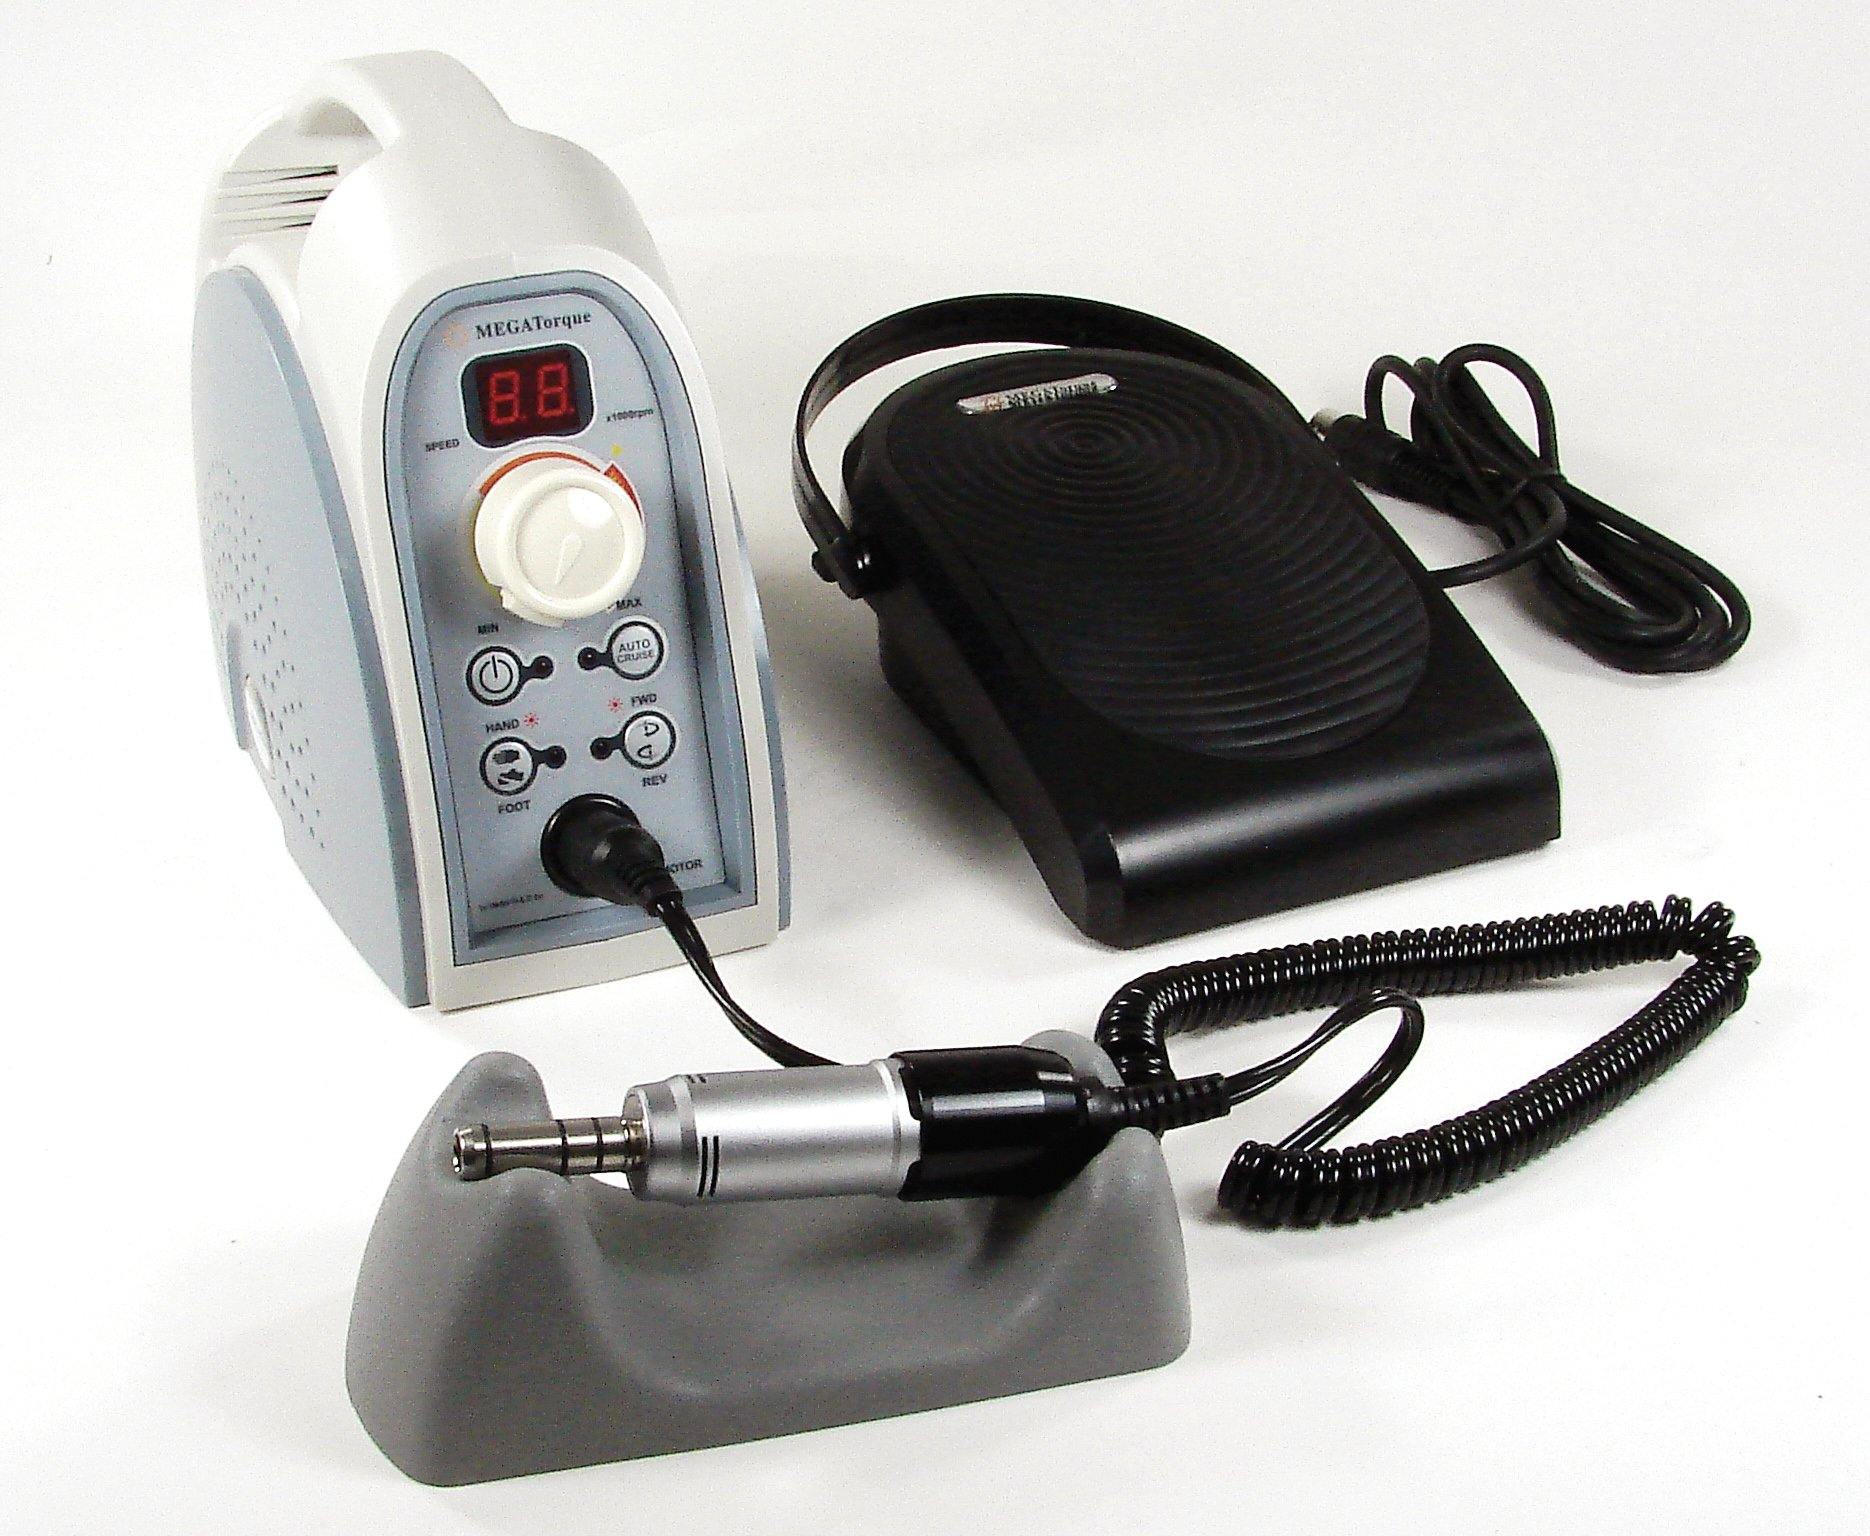 Vector EL-SE VECTOR Electric E-Type Lab Handpiece Set with Variable Speed Foot Pedal